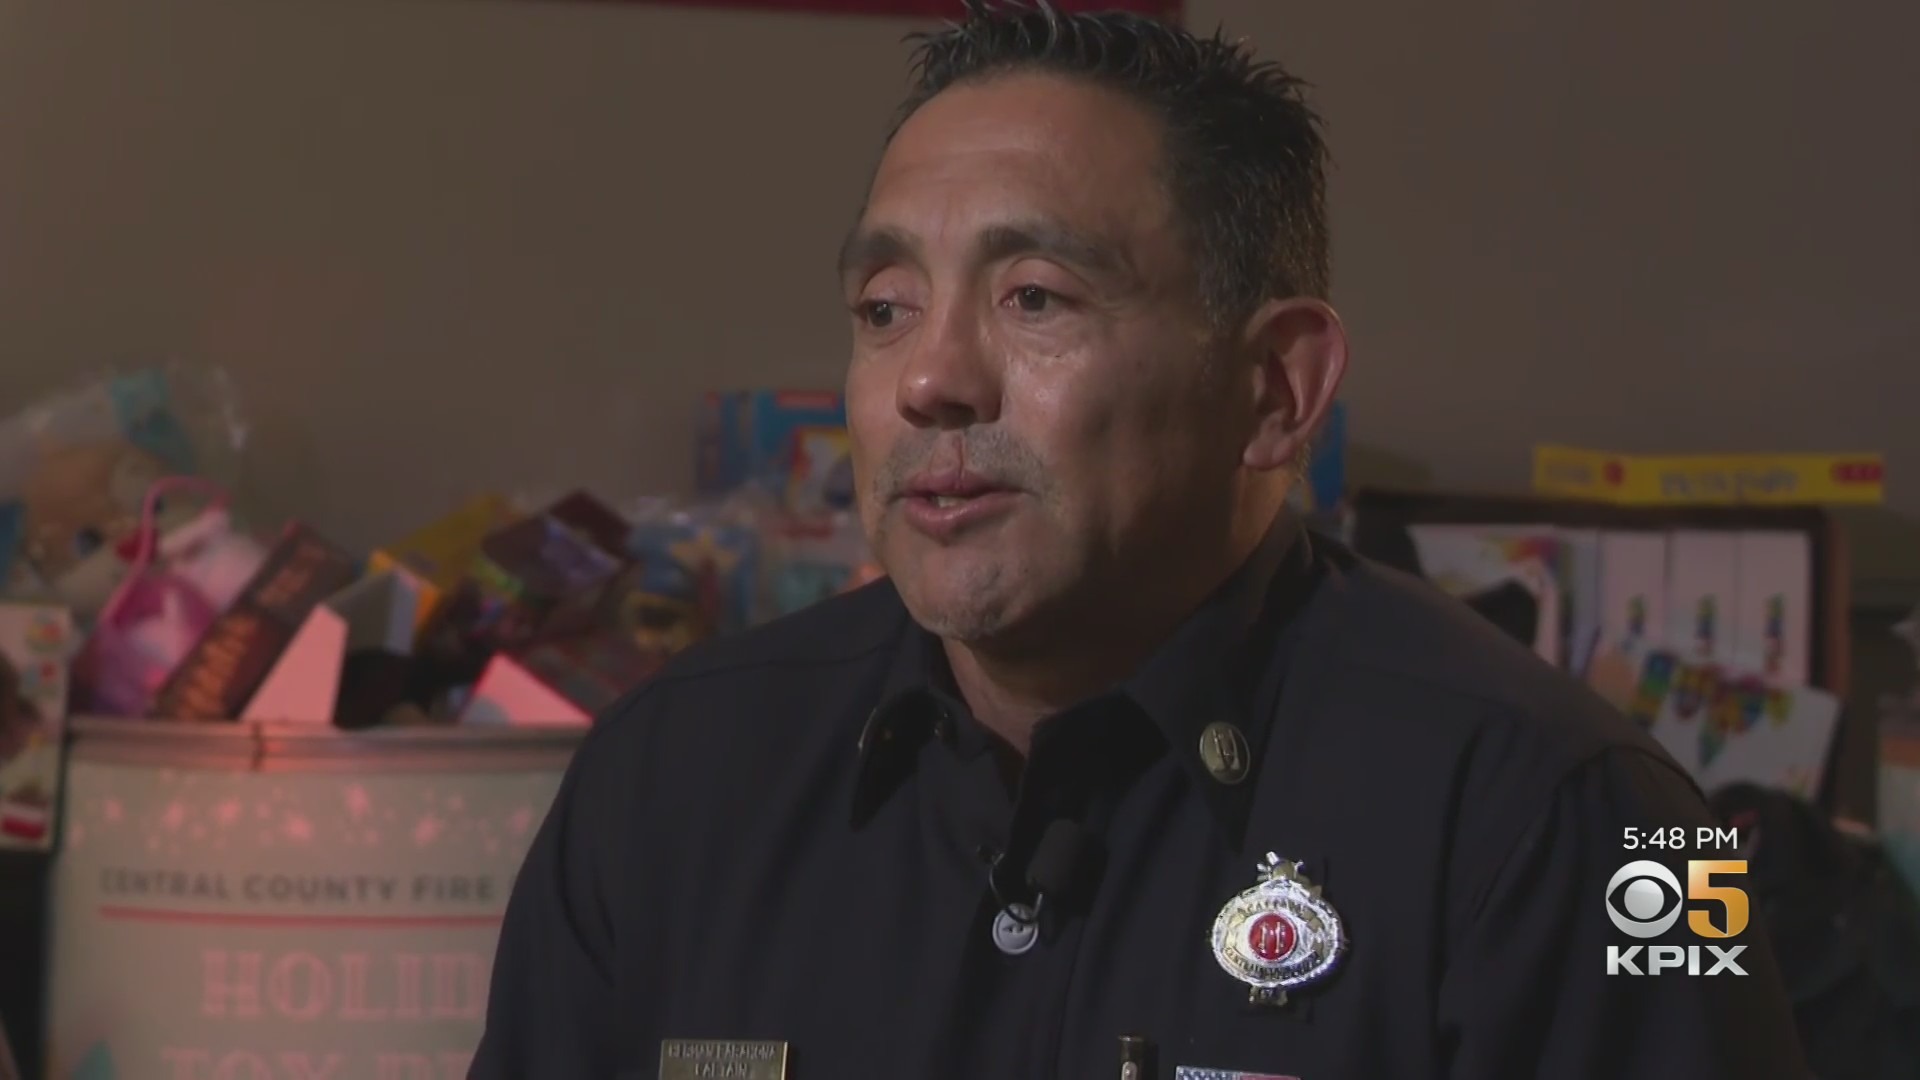 Jefferson Awards: Peninsula Fire Captain Helps Bring Holiday Spirit To Children In Need